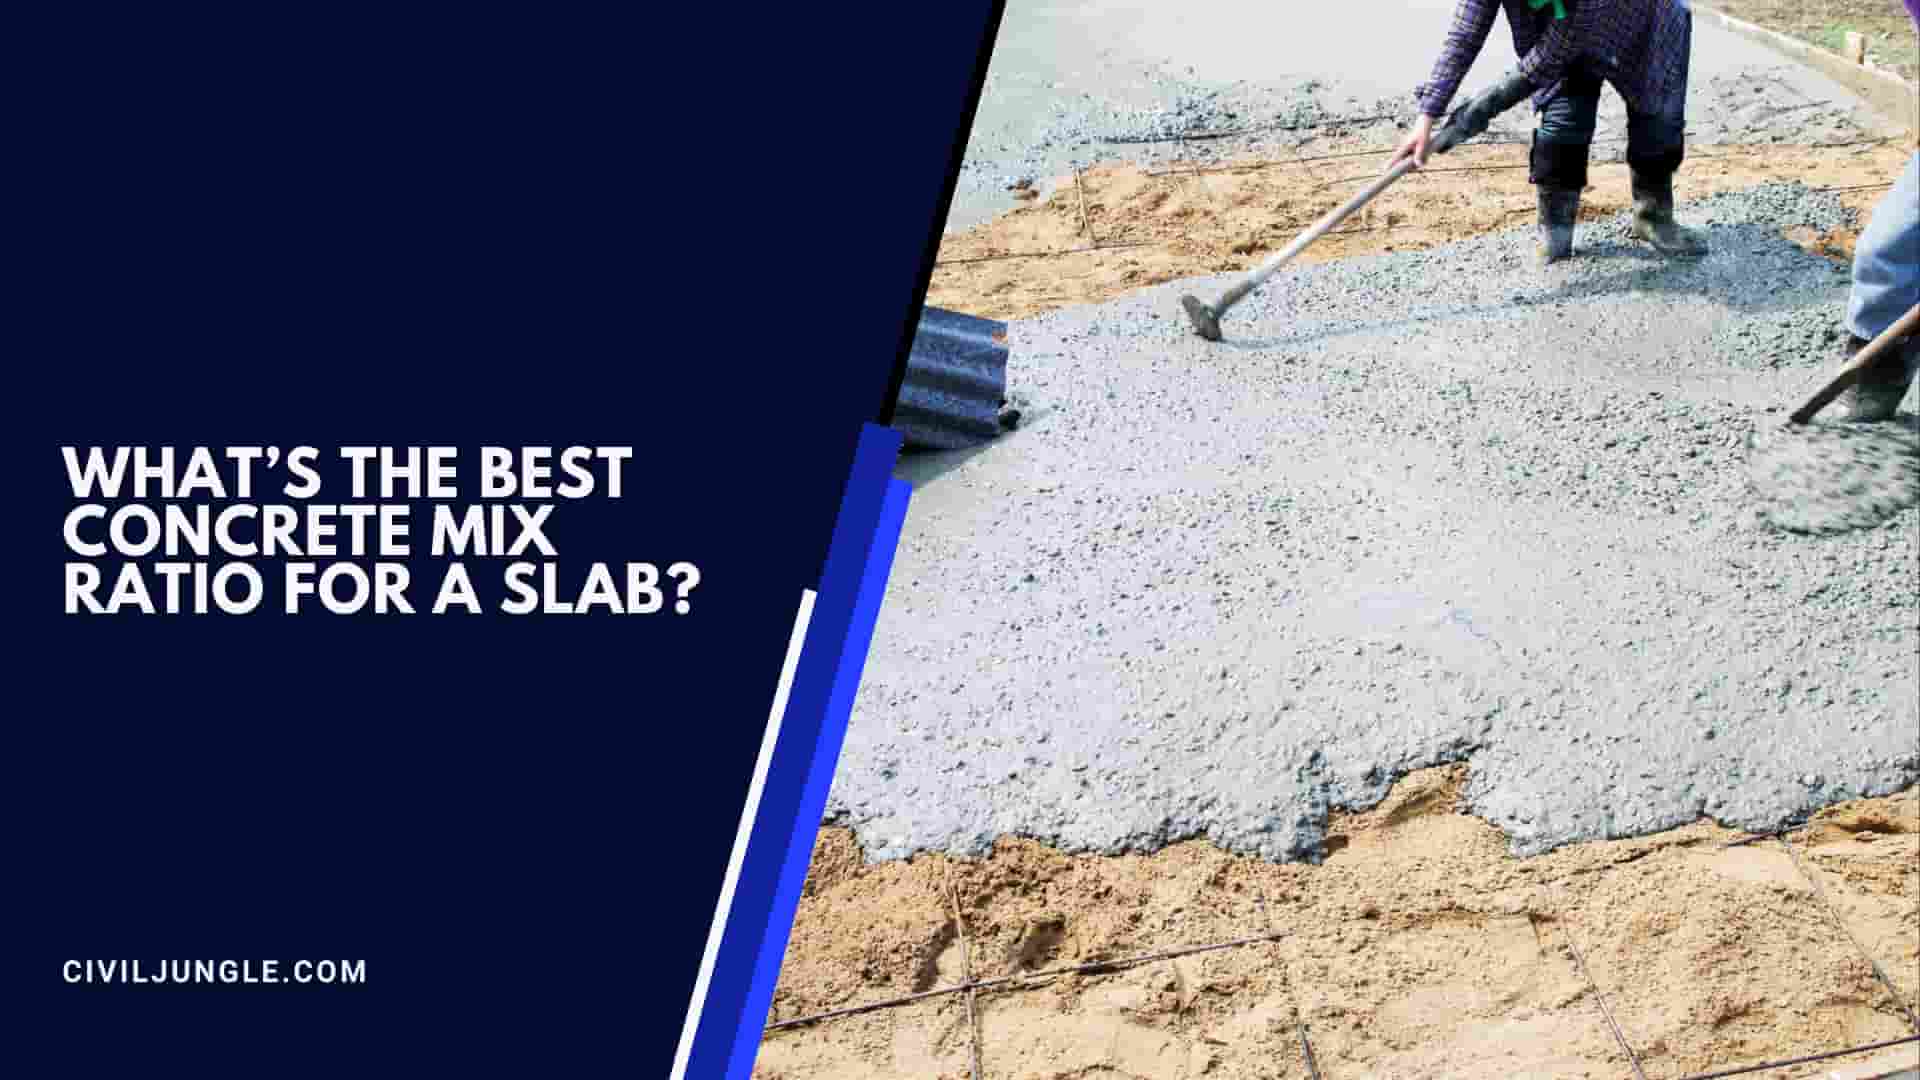 What’s The Best Concrete Mix Ratio For A Slab?